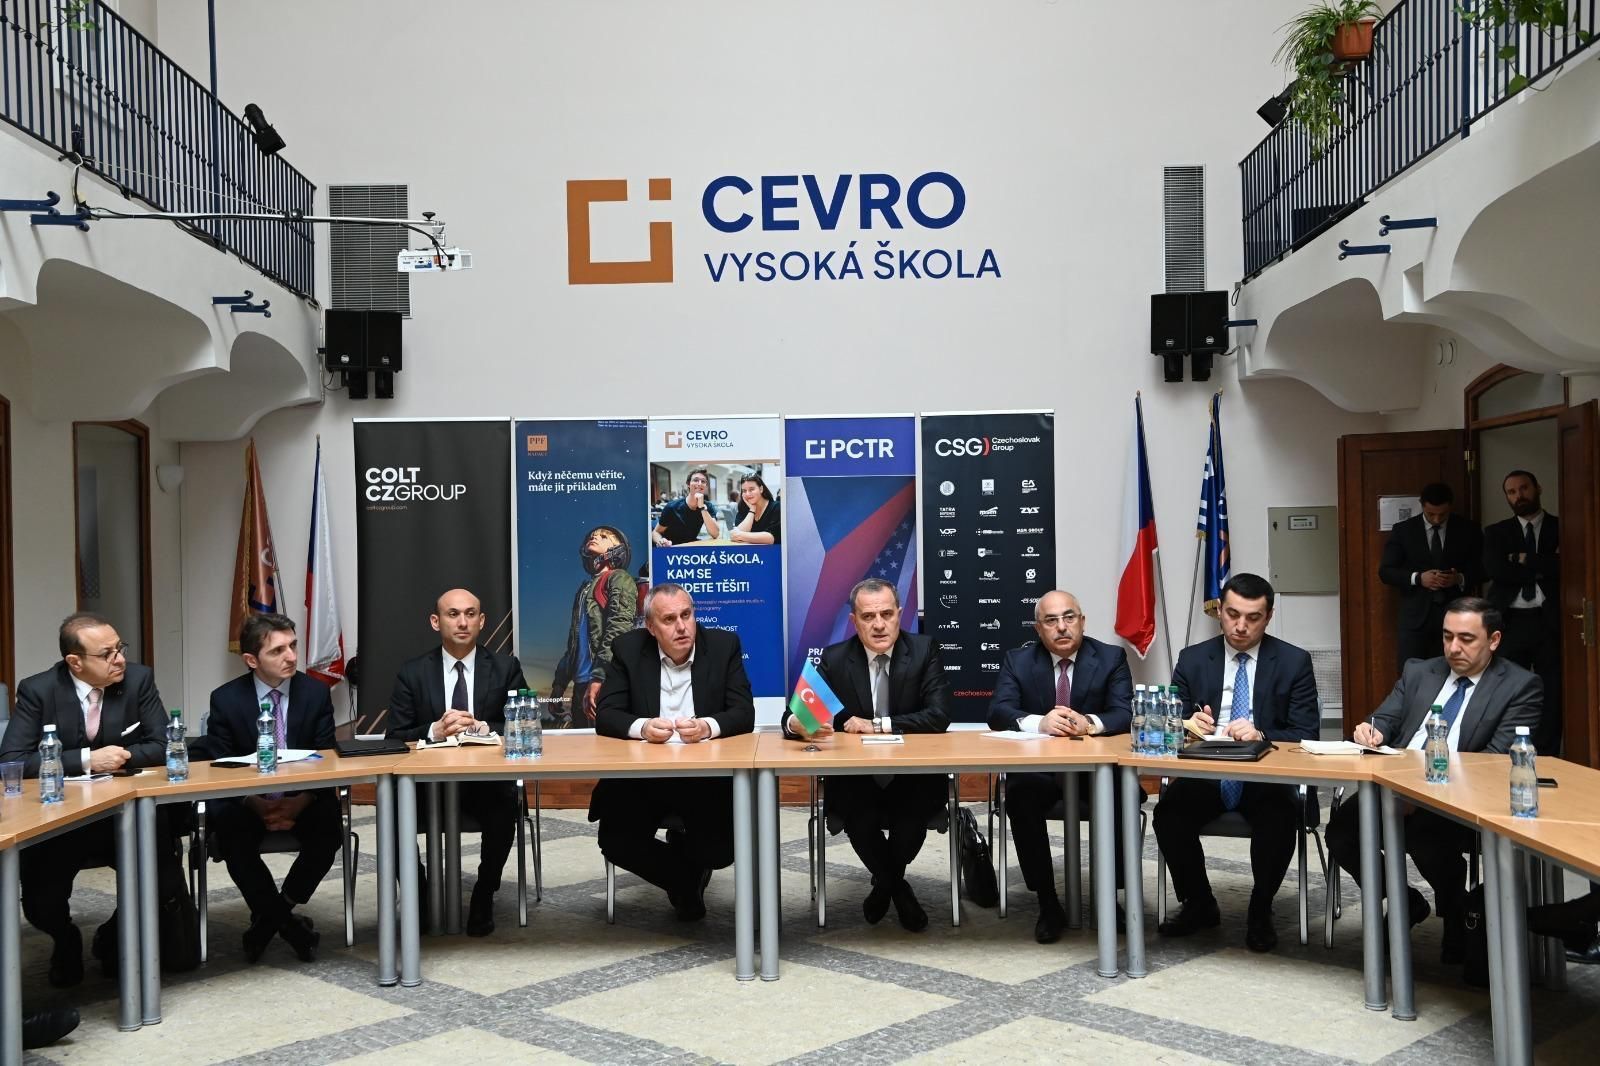 Azerbaijani top FM exchanges ideas with a number of people in Czech Republic [PHOTOS]